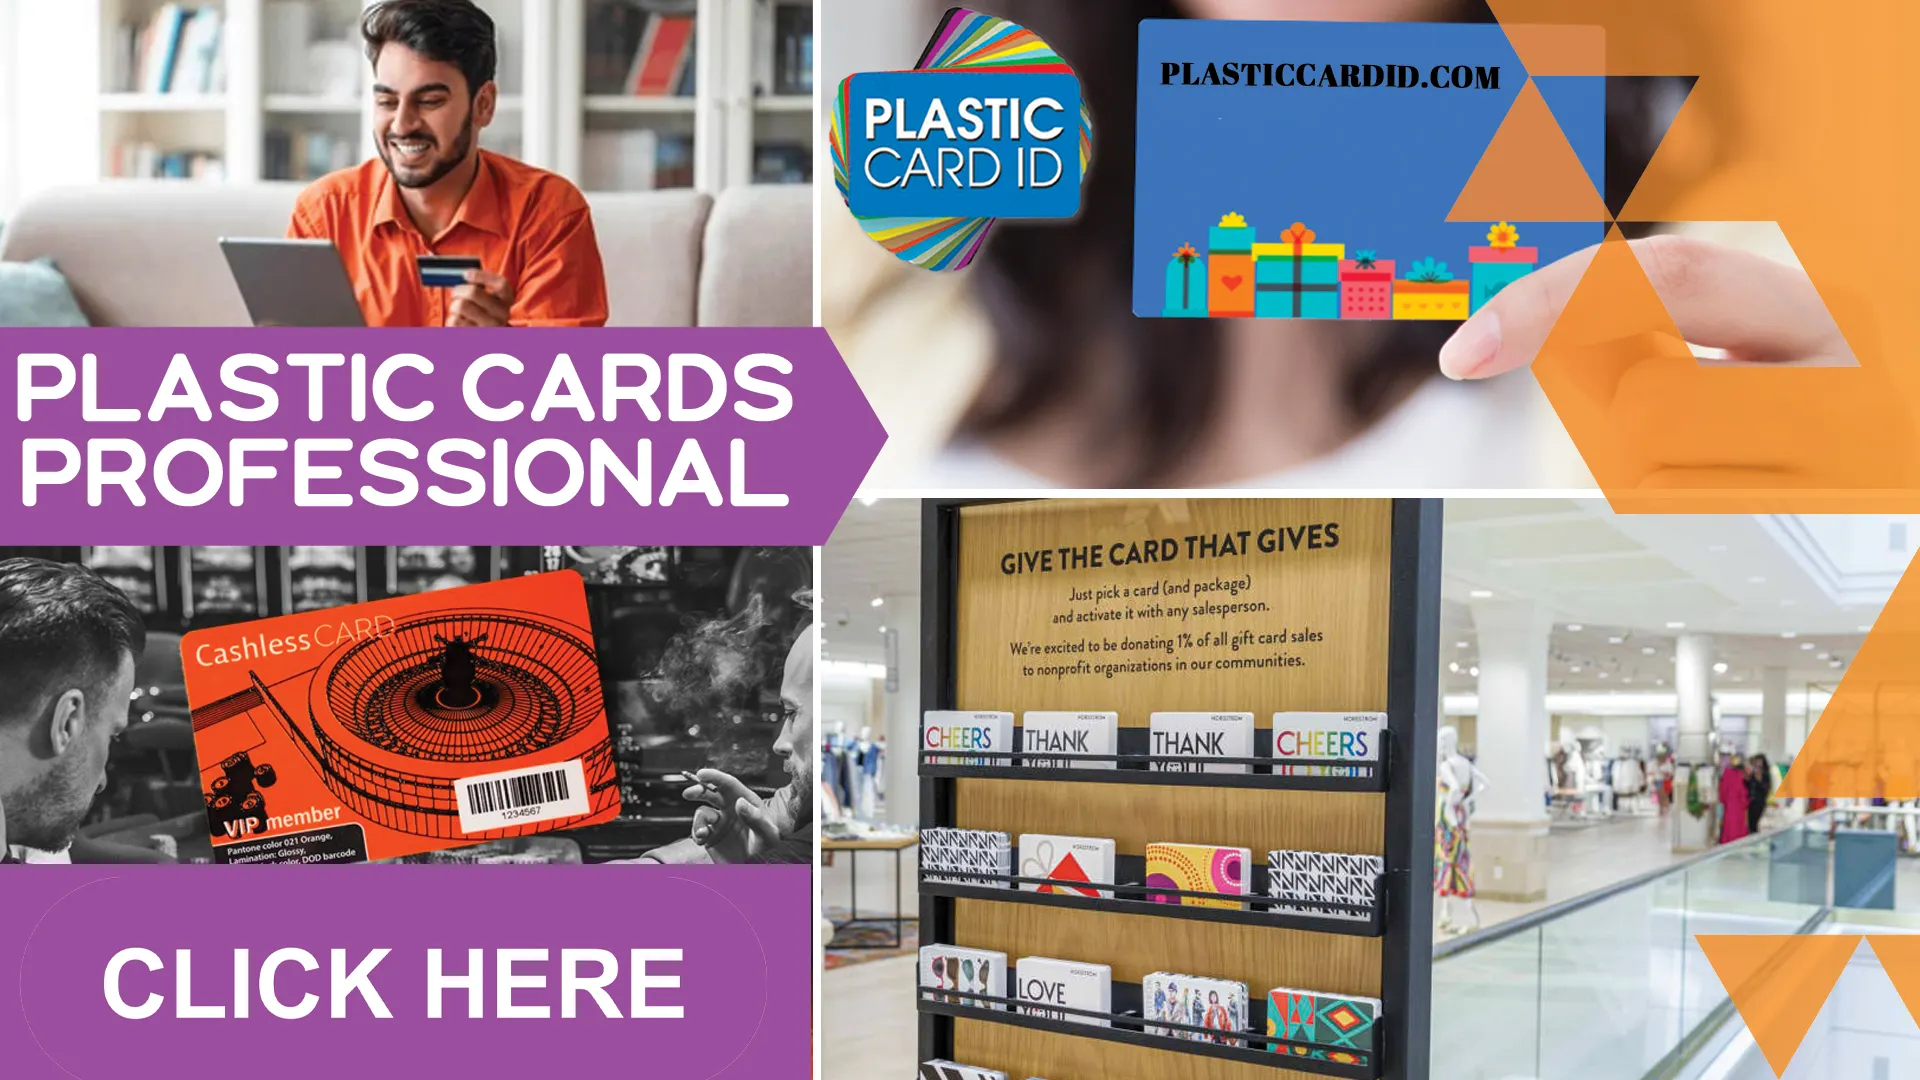 Welcome to Proactive Card Care with Plastic Card ID




